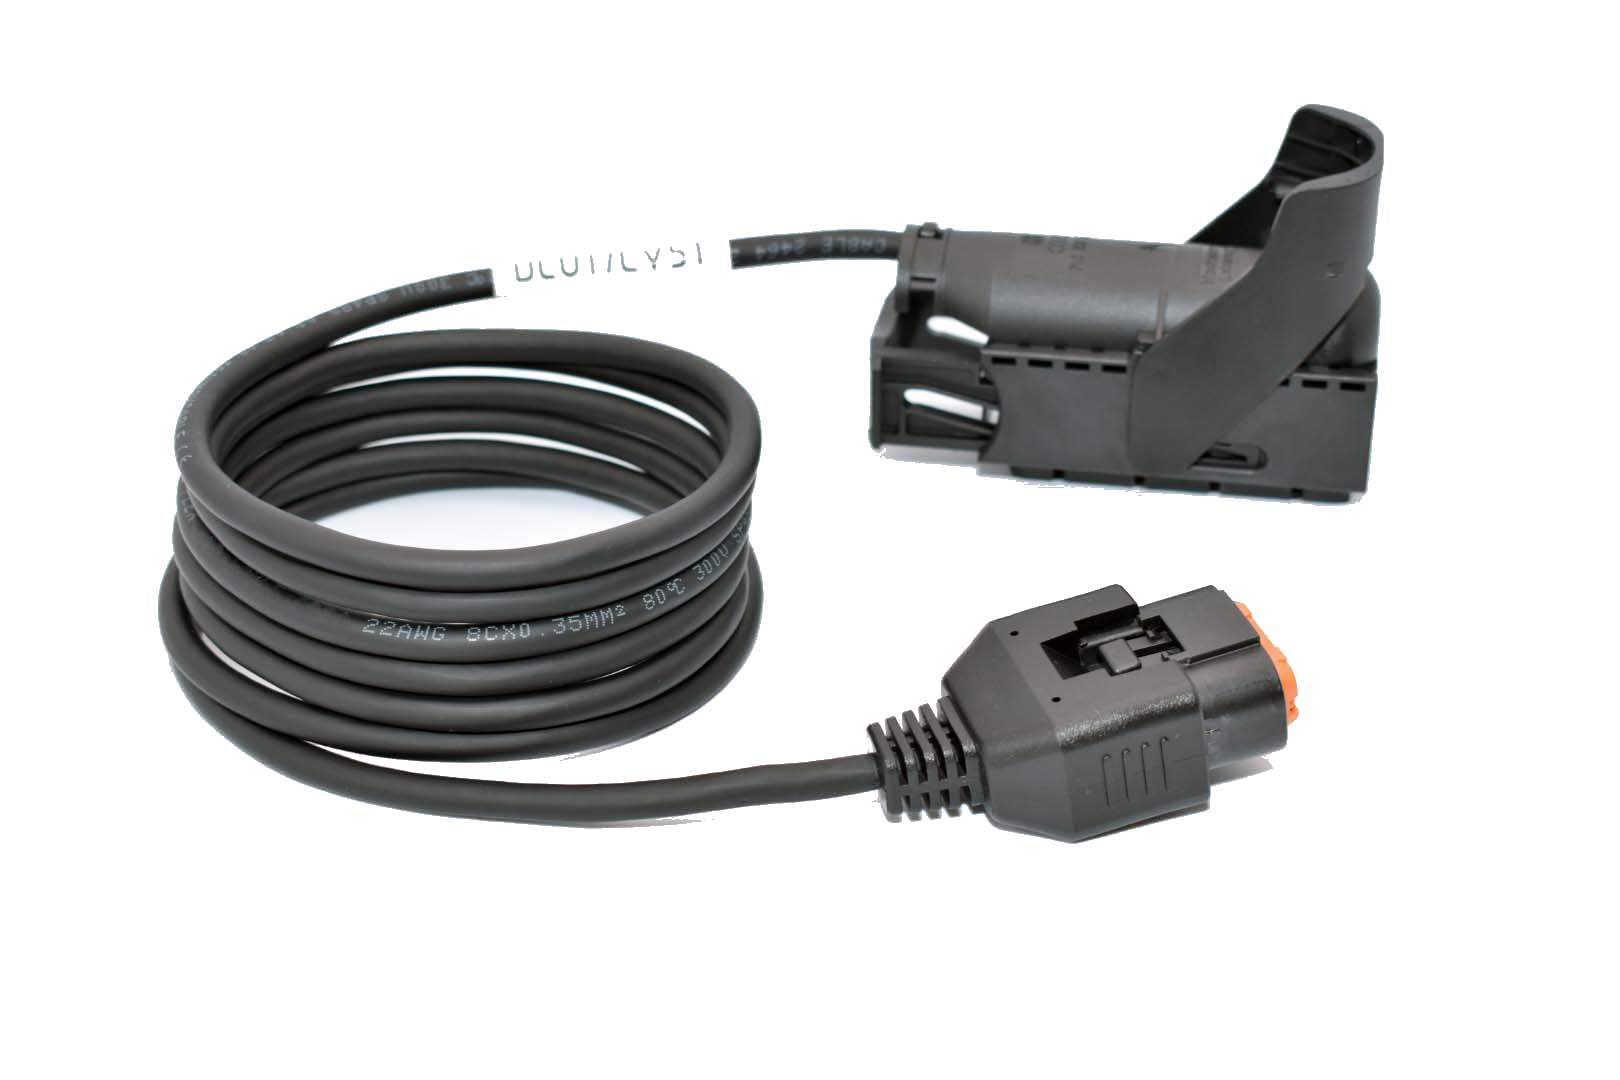 Bosch DCU17PC01 Mercedes Bench programming Cable Harness is used to easily connect a flashing tool directly to a Mercedes DCU17PC01 for reprogramming. Chip tuning, remapping and Diagnostic use